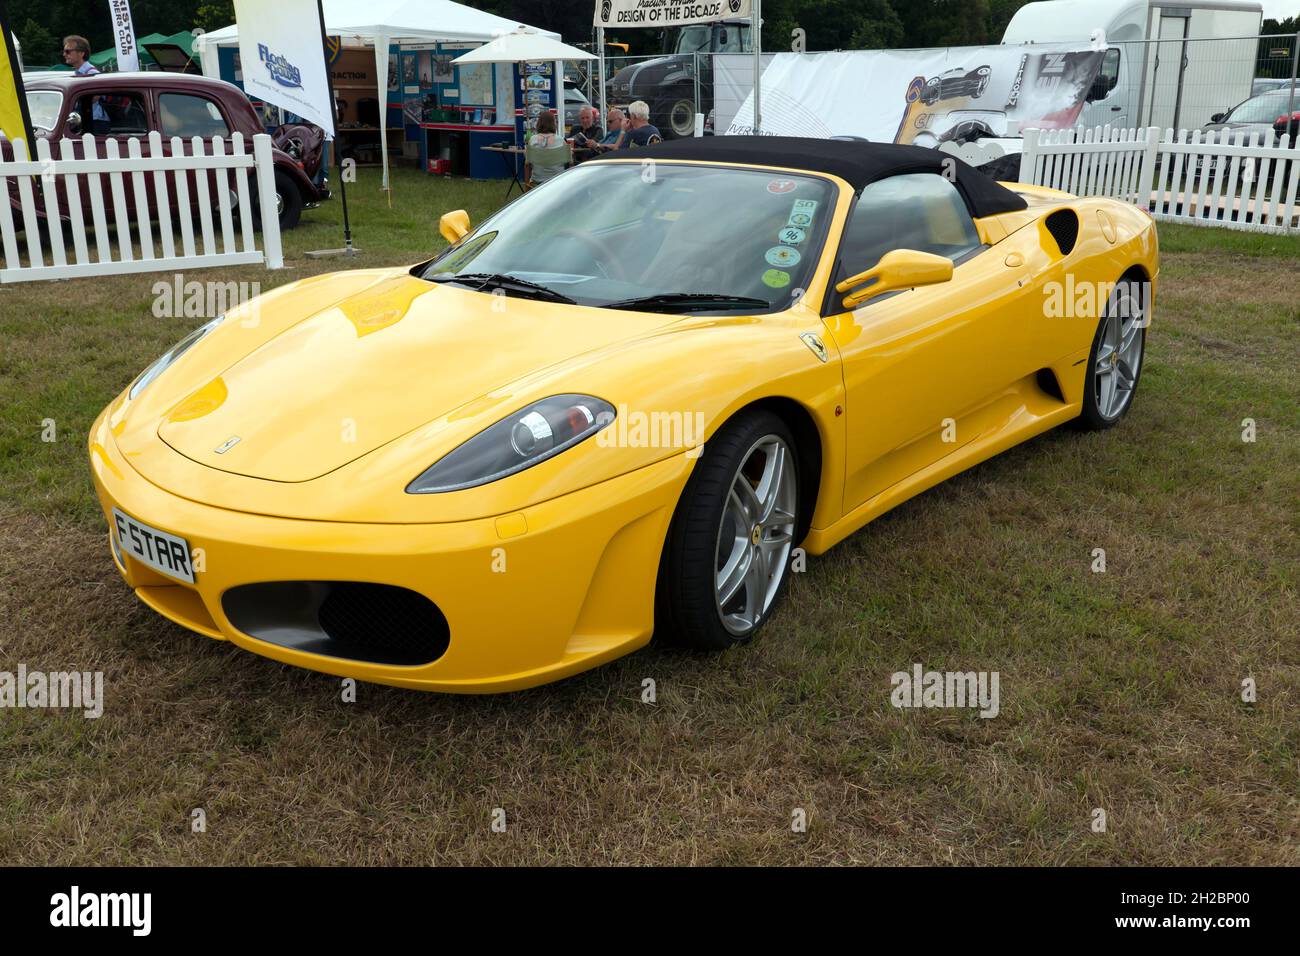 Three-quarter front view of a Yellow, 2006, Ferrari F430 Spyder, on display at the 2021 London Classic Car Show Stock Photo